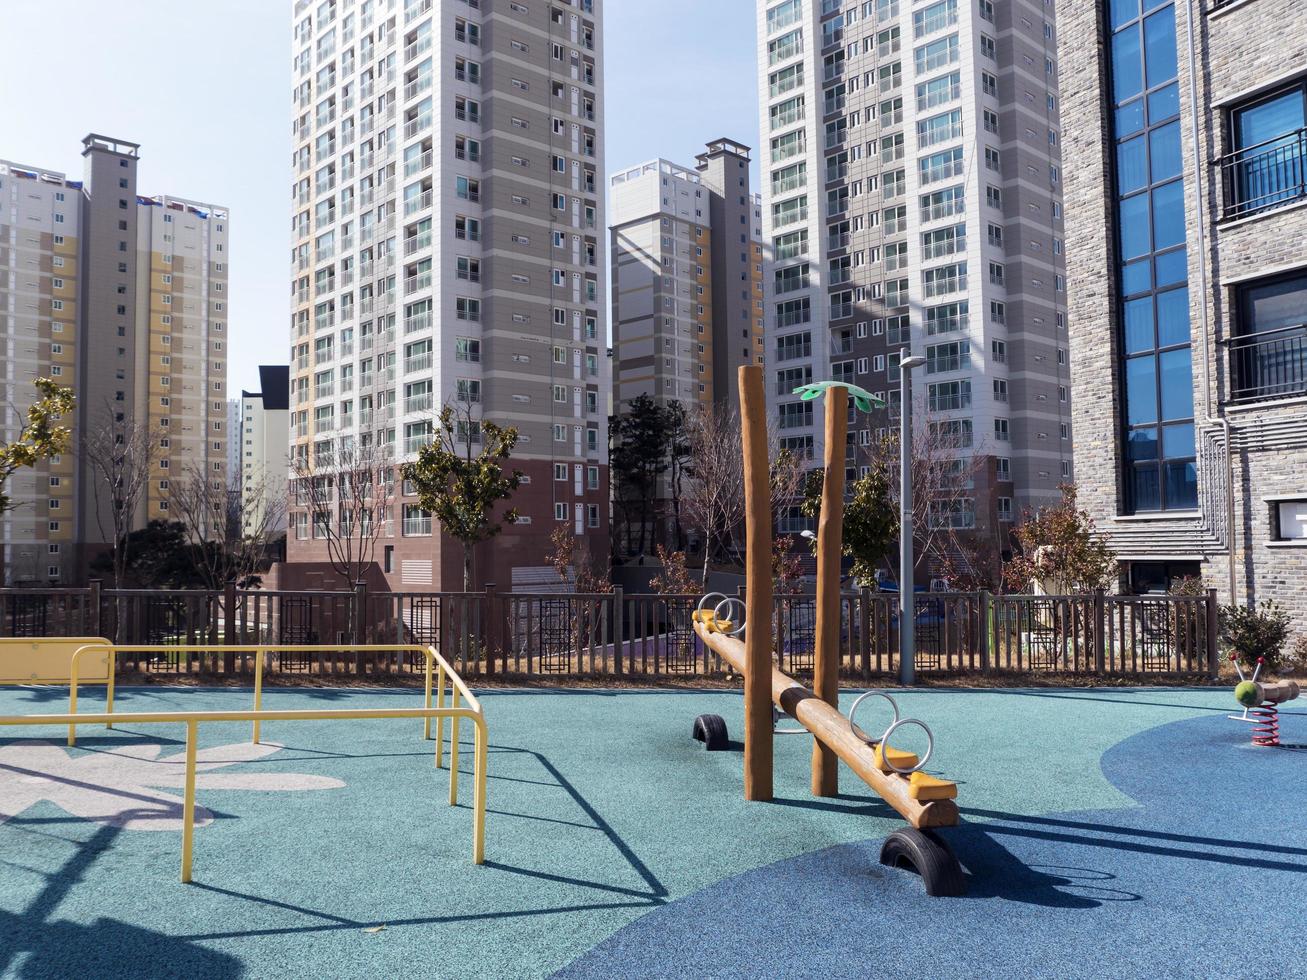 The playground for children and big buildings in rich area of Yeosu city. South Korea photo